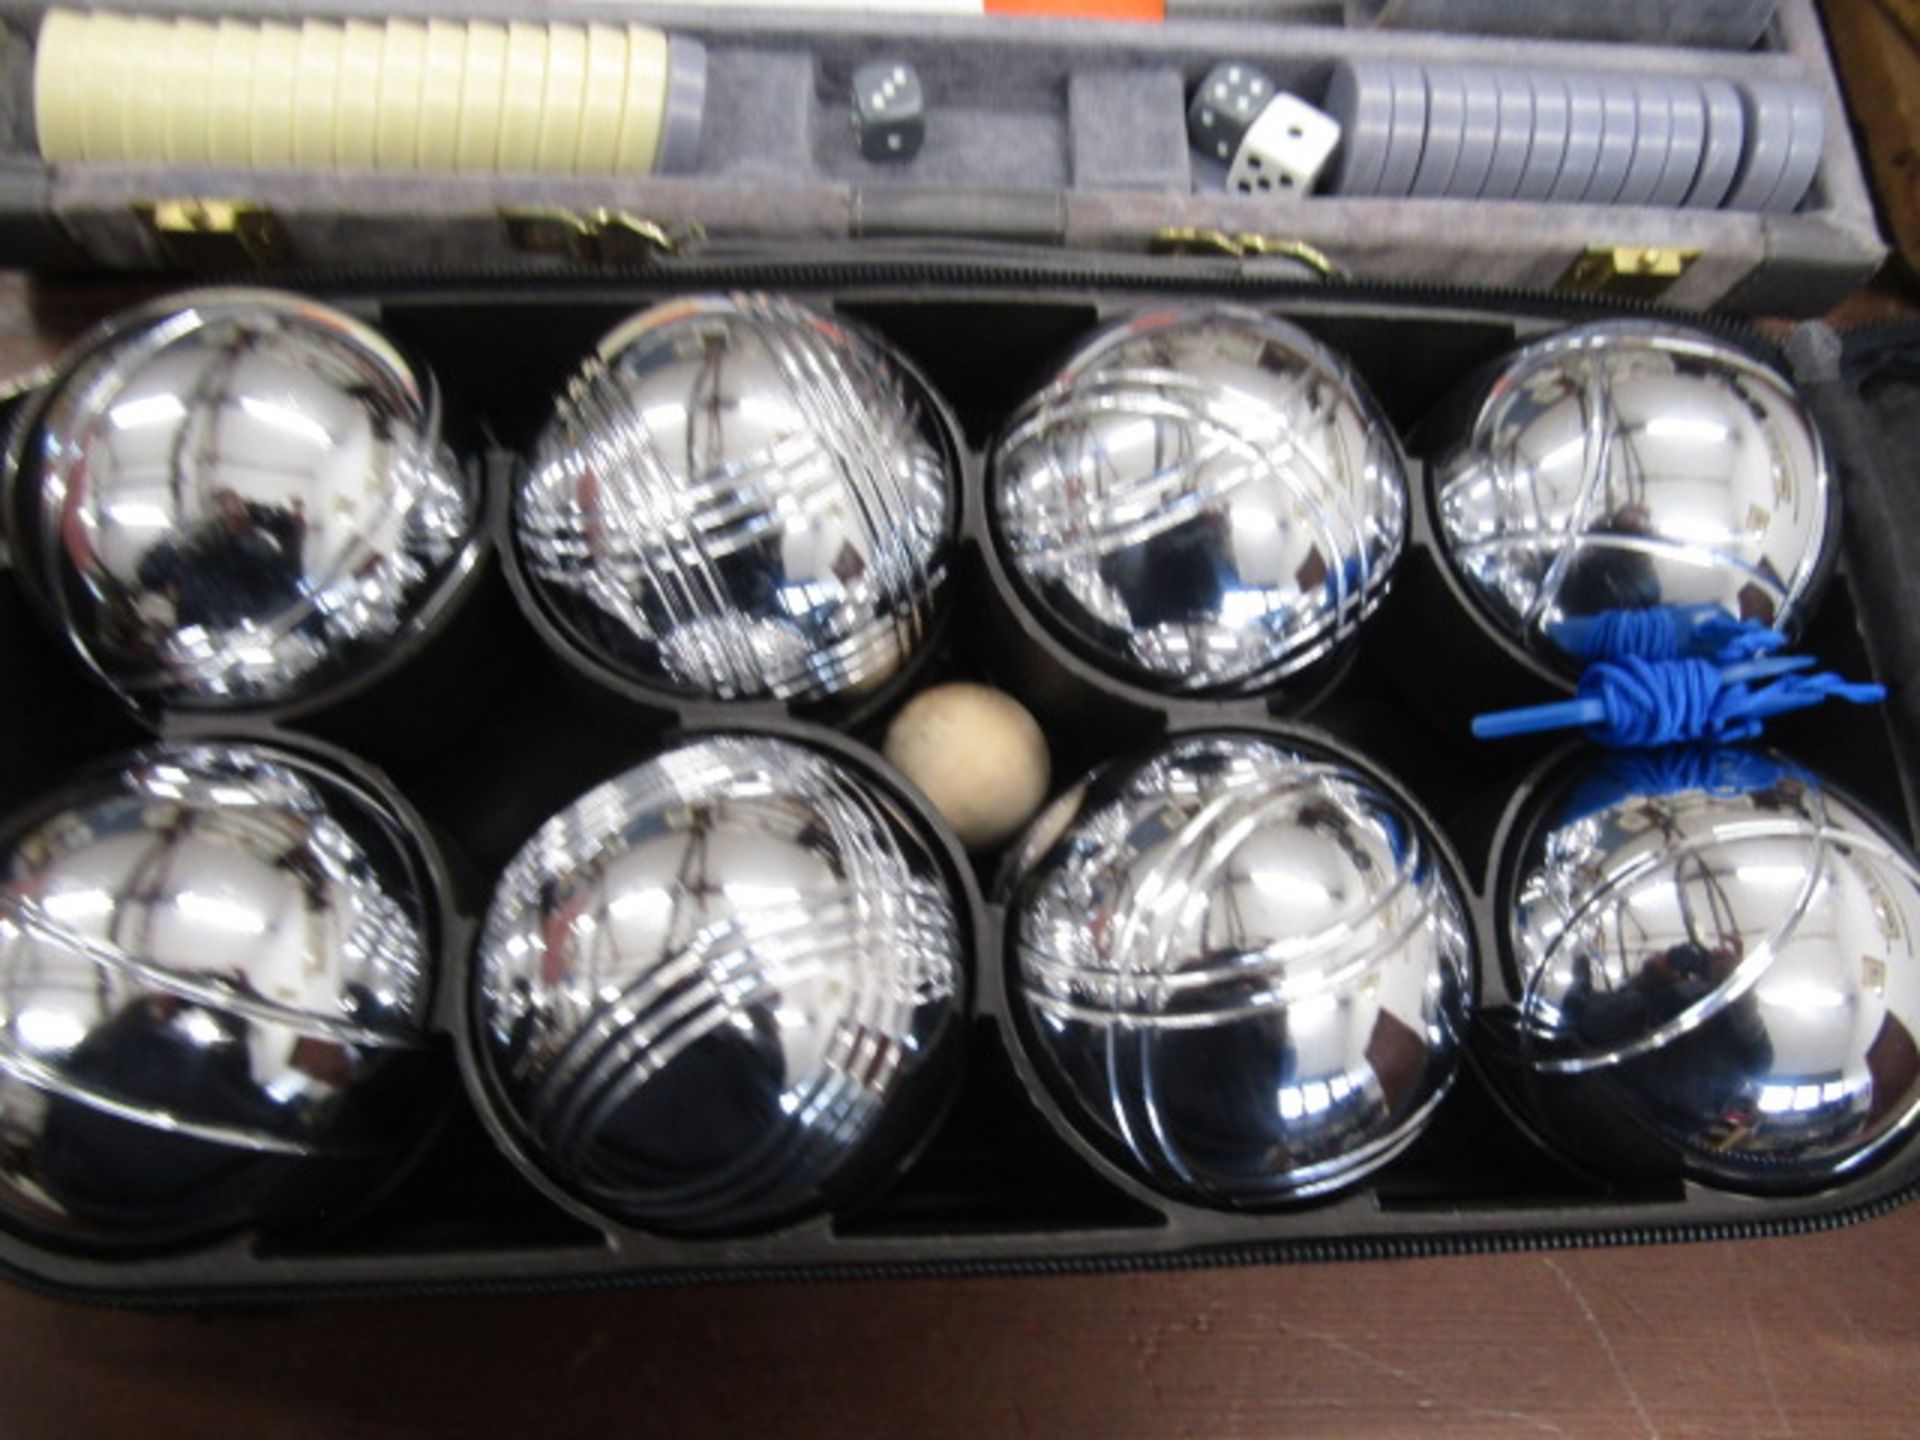 a backgammon set, Boules and vintage racket - Image 2 of 4